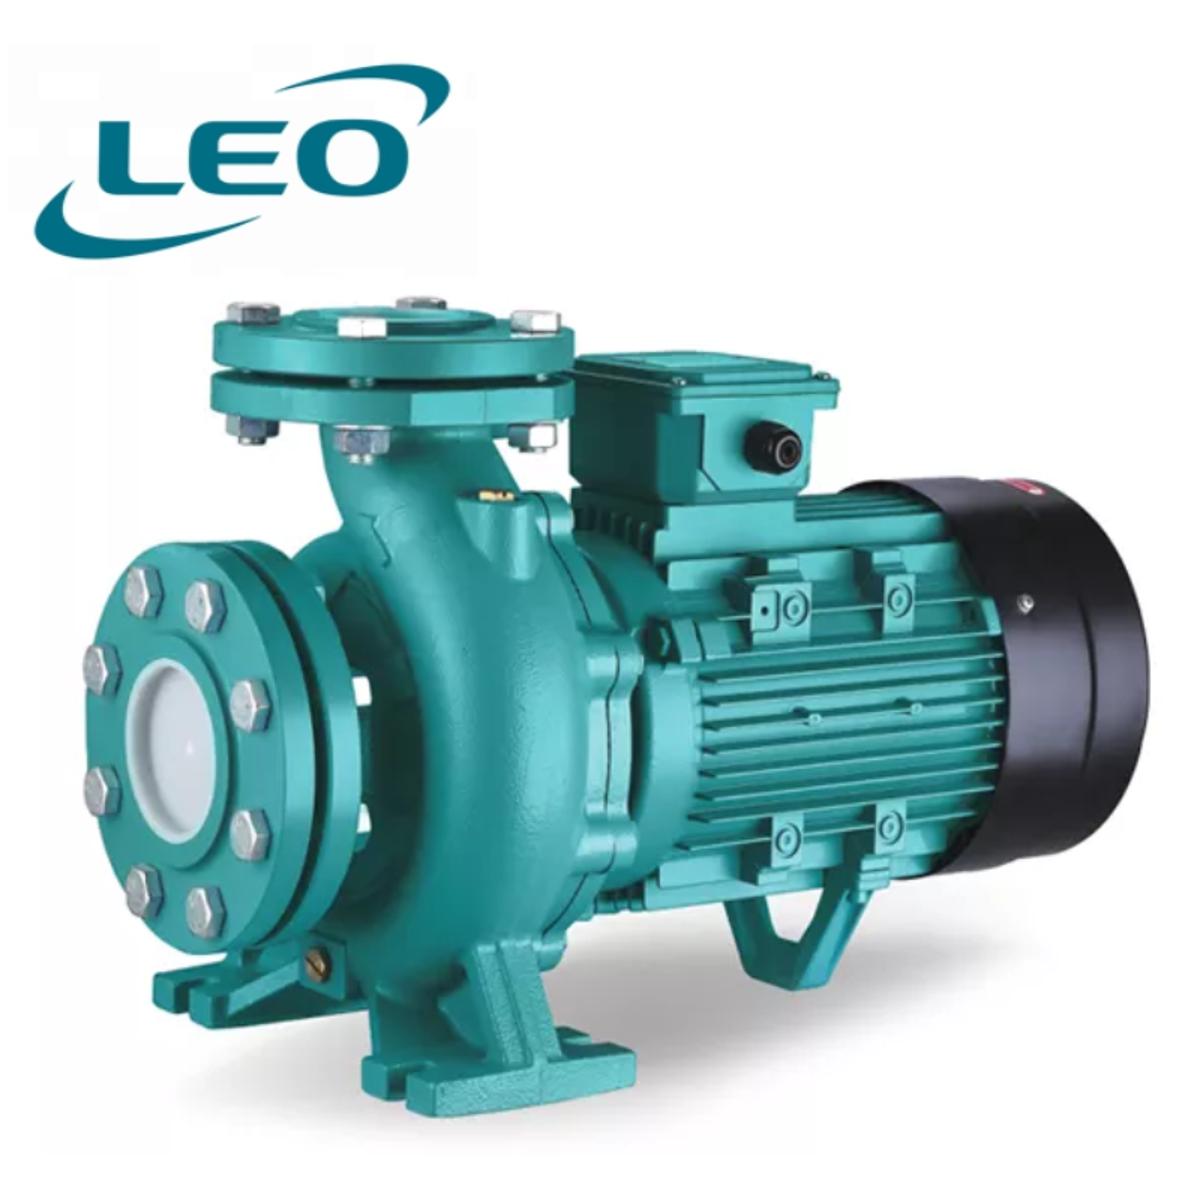 LEO - XST-50-160-55 - 5500 W - 7.5 HP - Clean Water HEAVY DUTY Centrifugal Pump With FLANGES  - 380V~400V THREE PHASE - SIZE :- 2 1-2" x 2 " - European STANDARD